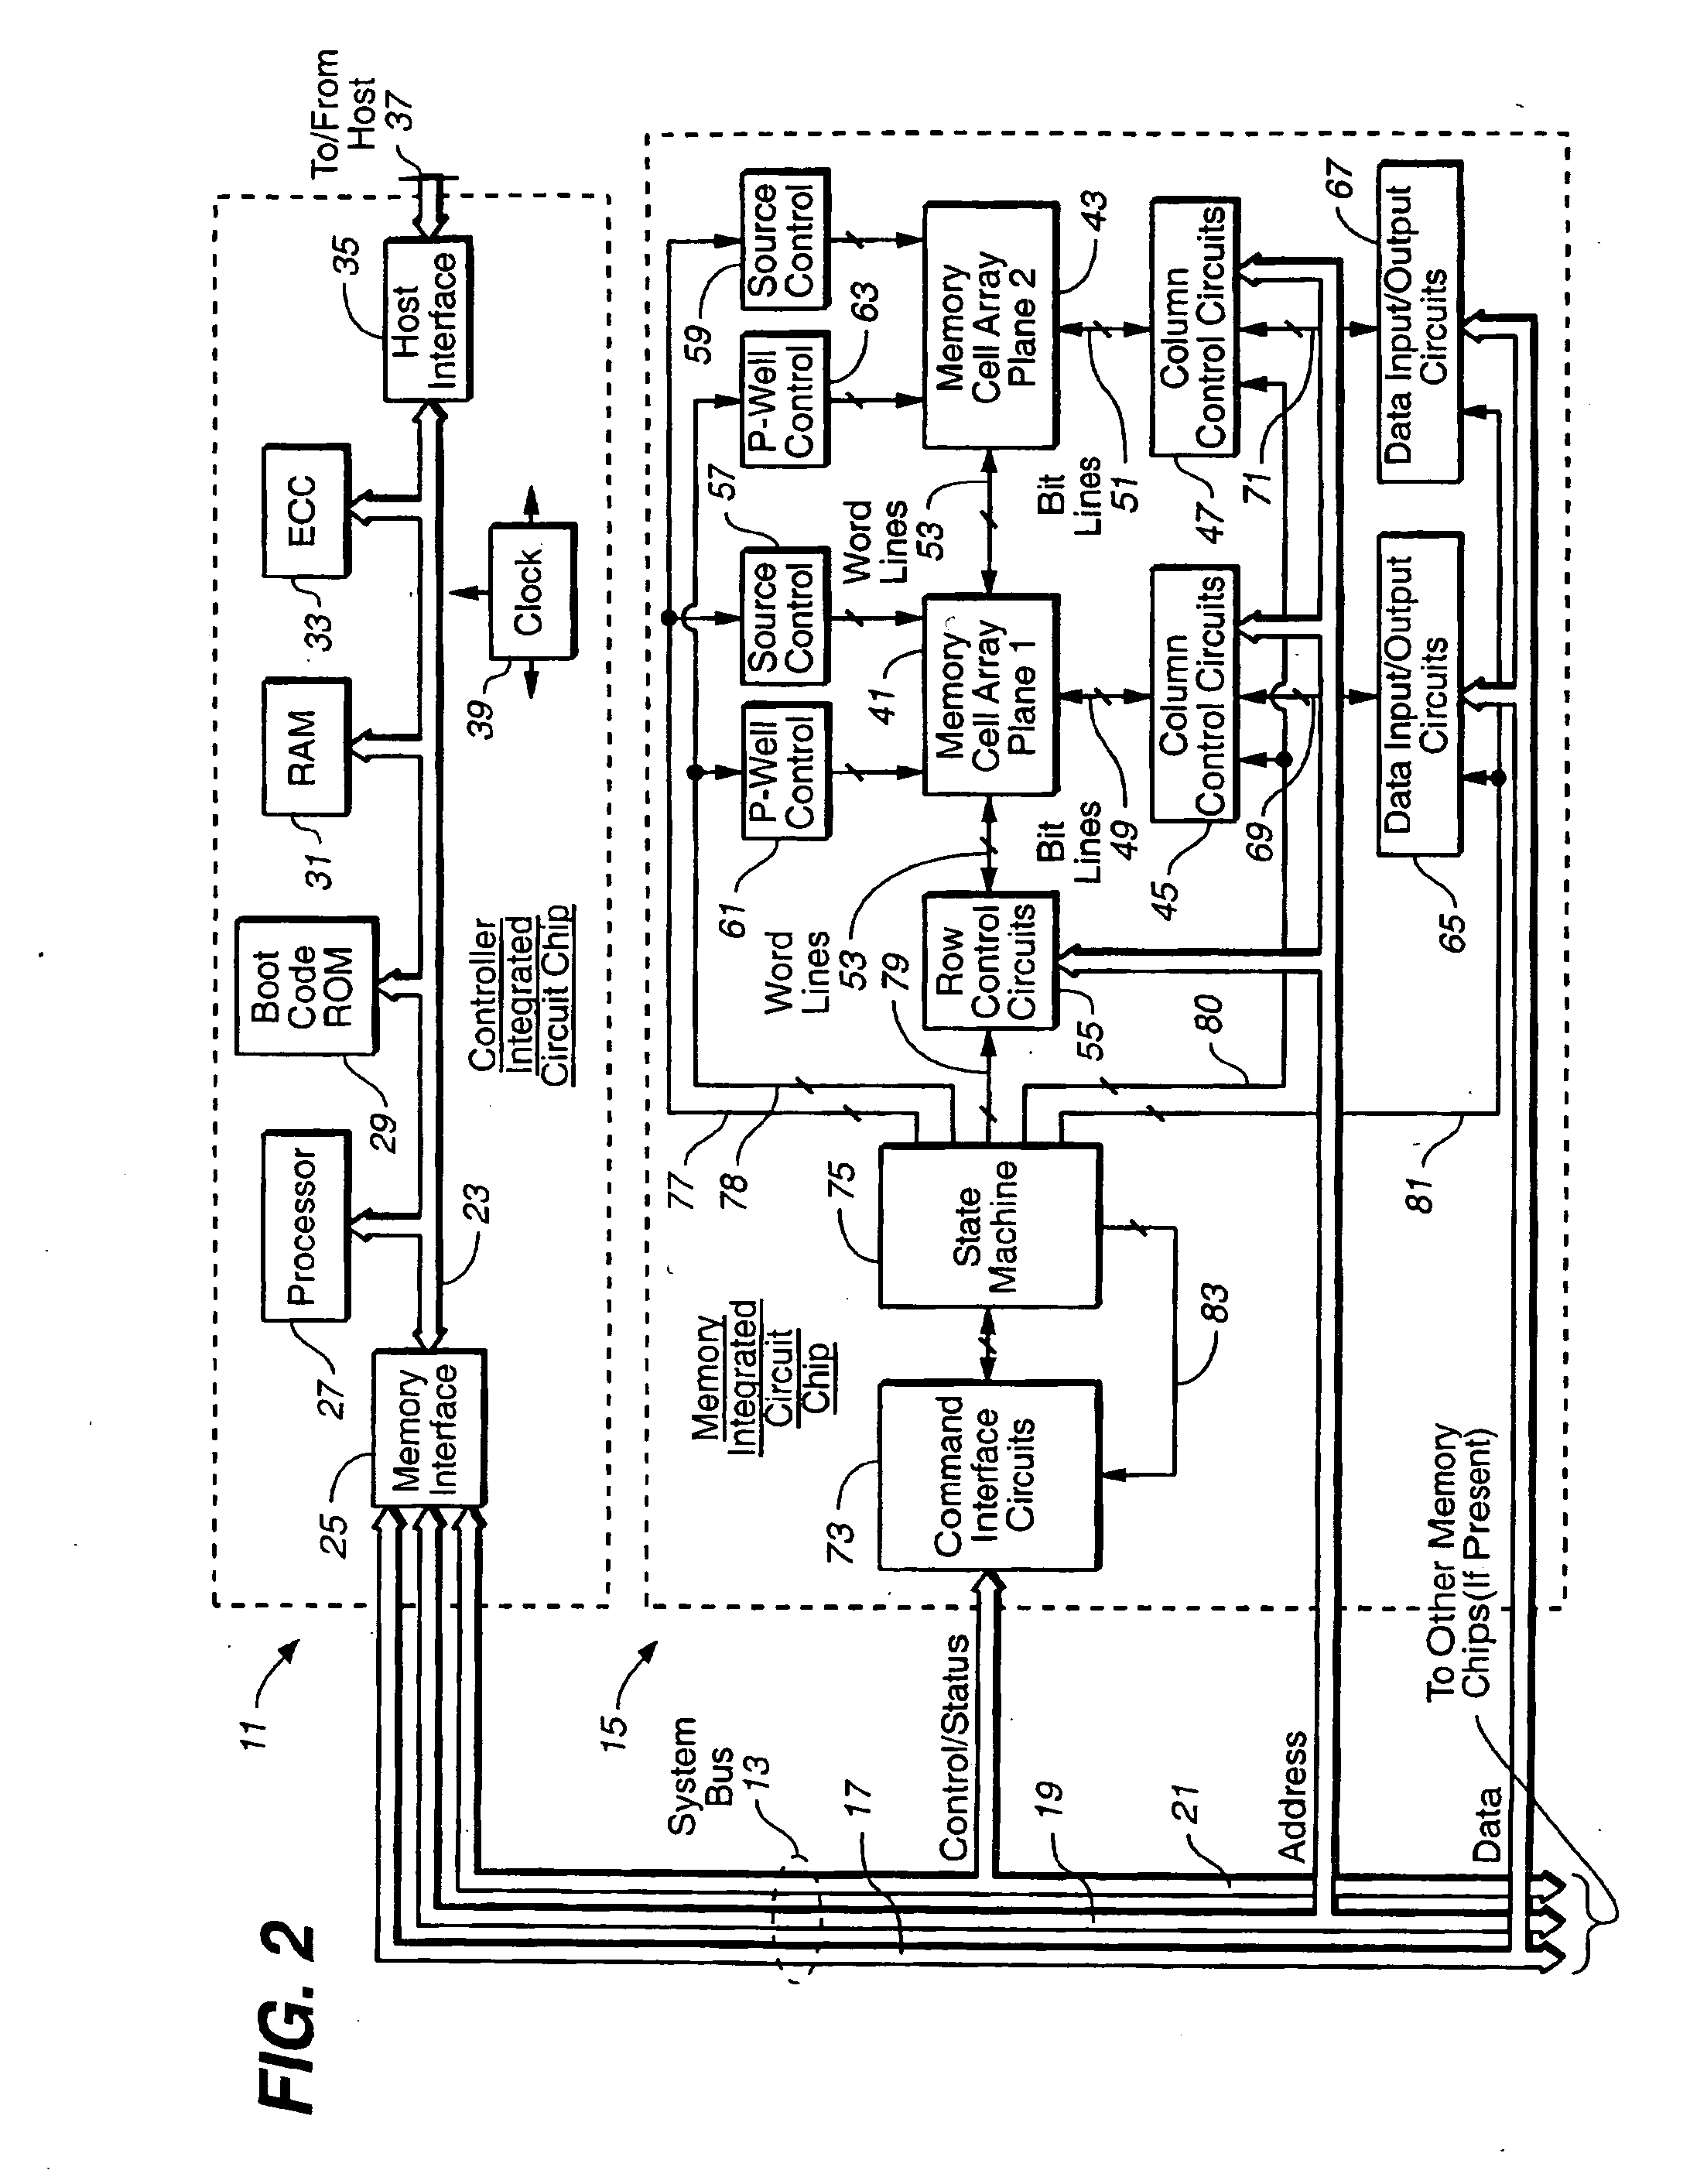 Non-volatile memories with memory allocation for a directly mapped file storage system